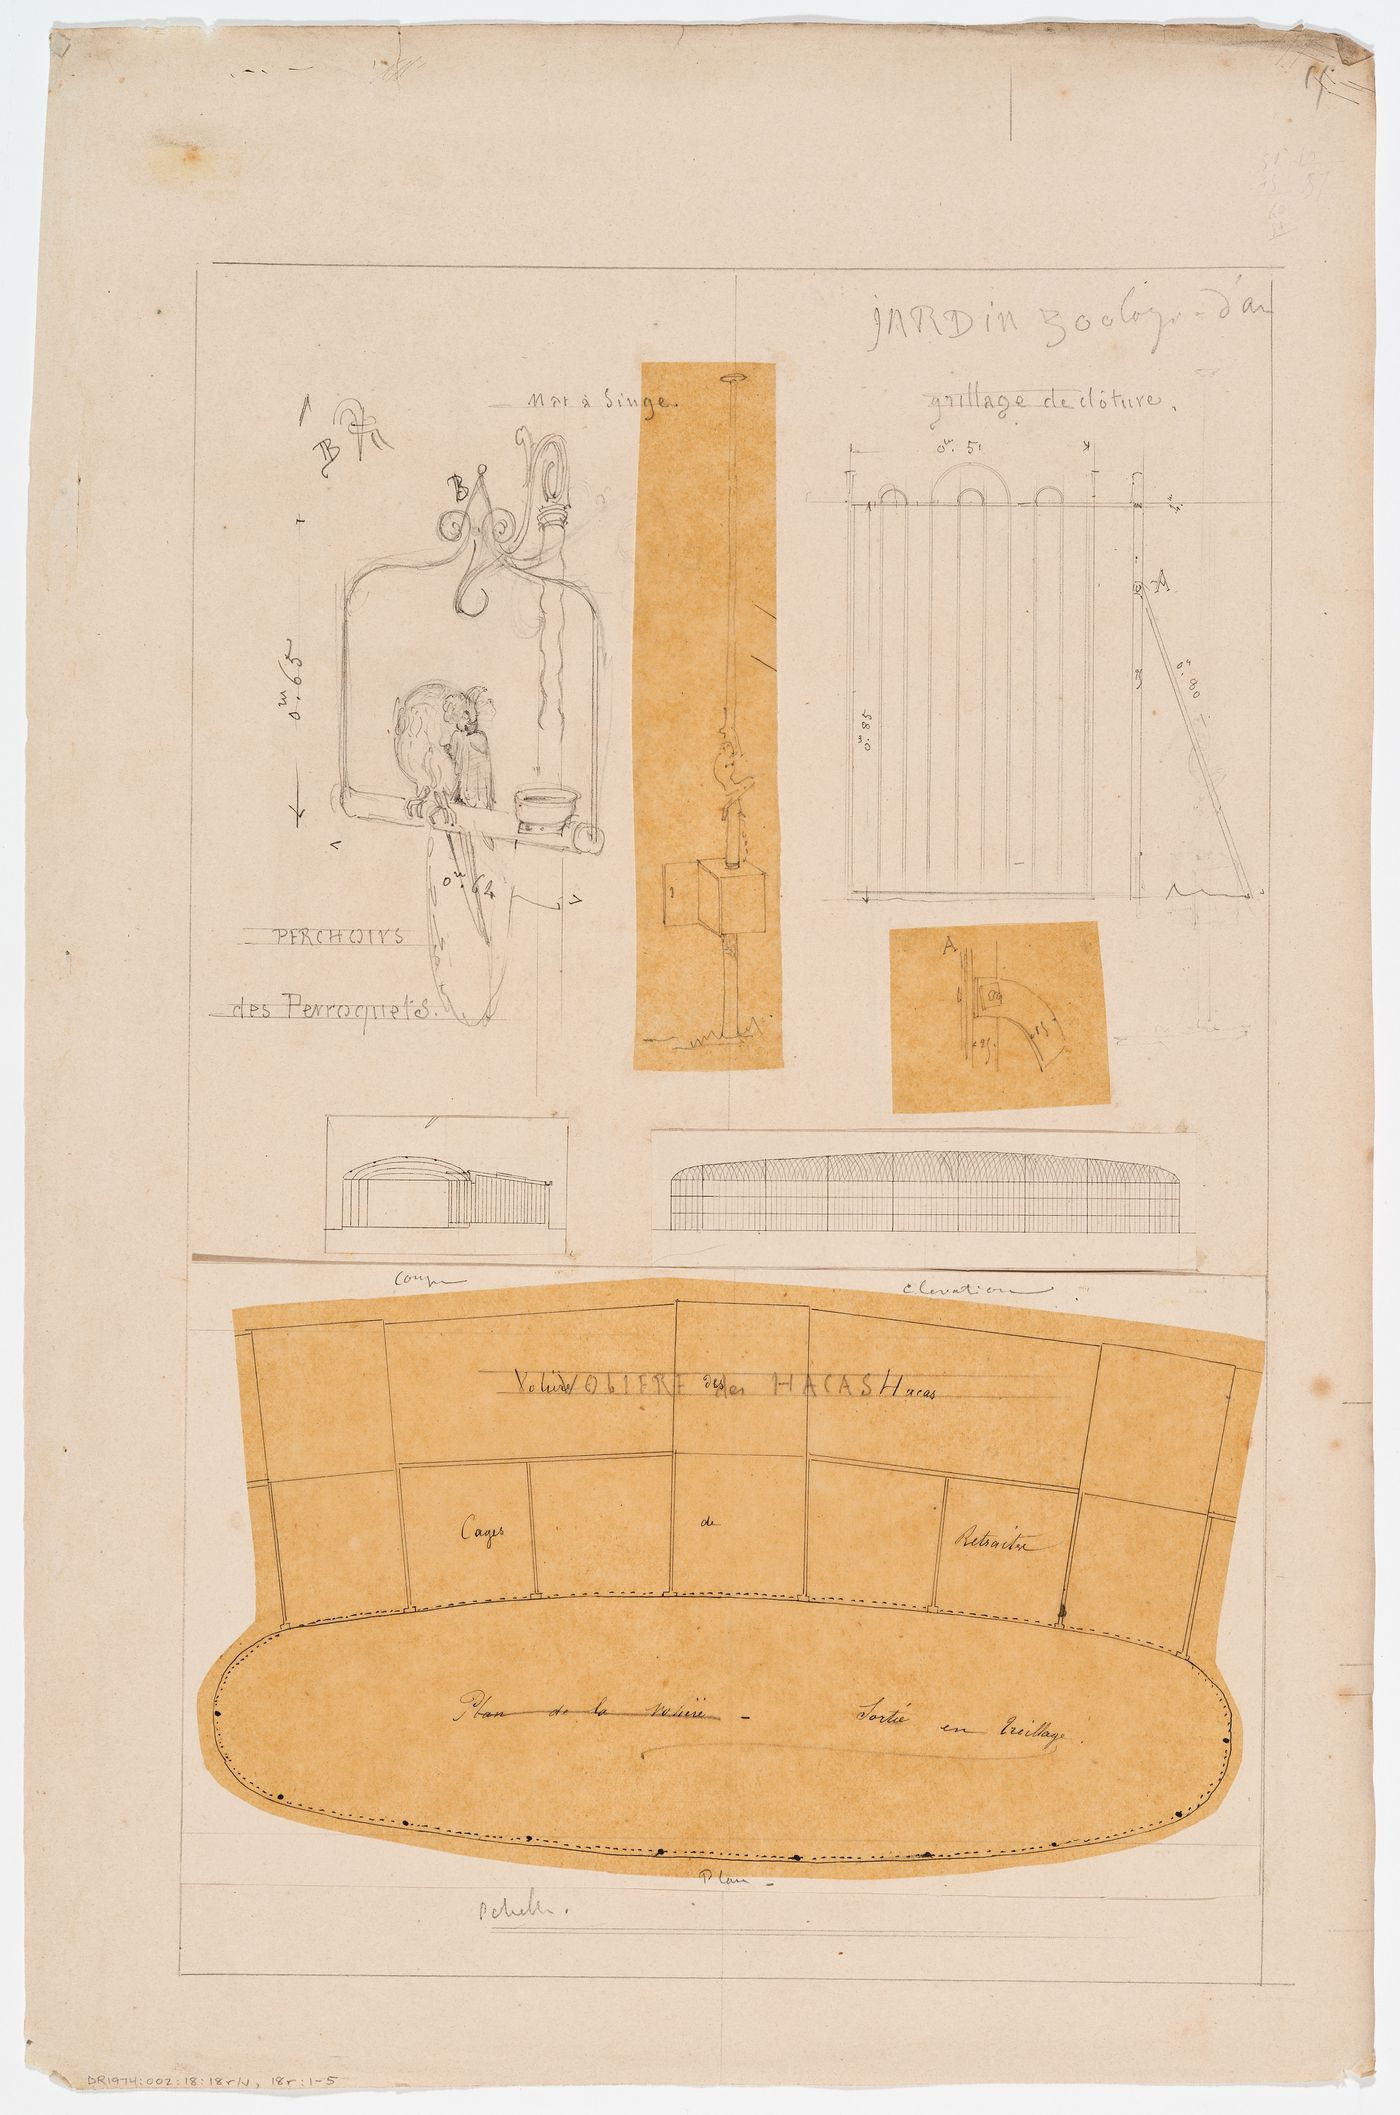 Zoological garden, Antwerp: Elevations of a monkey pole, a parrot perch, elevation and detail of a fence, and plan, section and elevation of an aviary